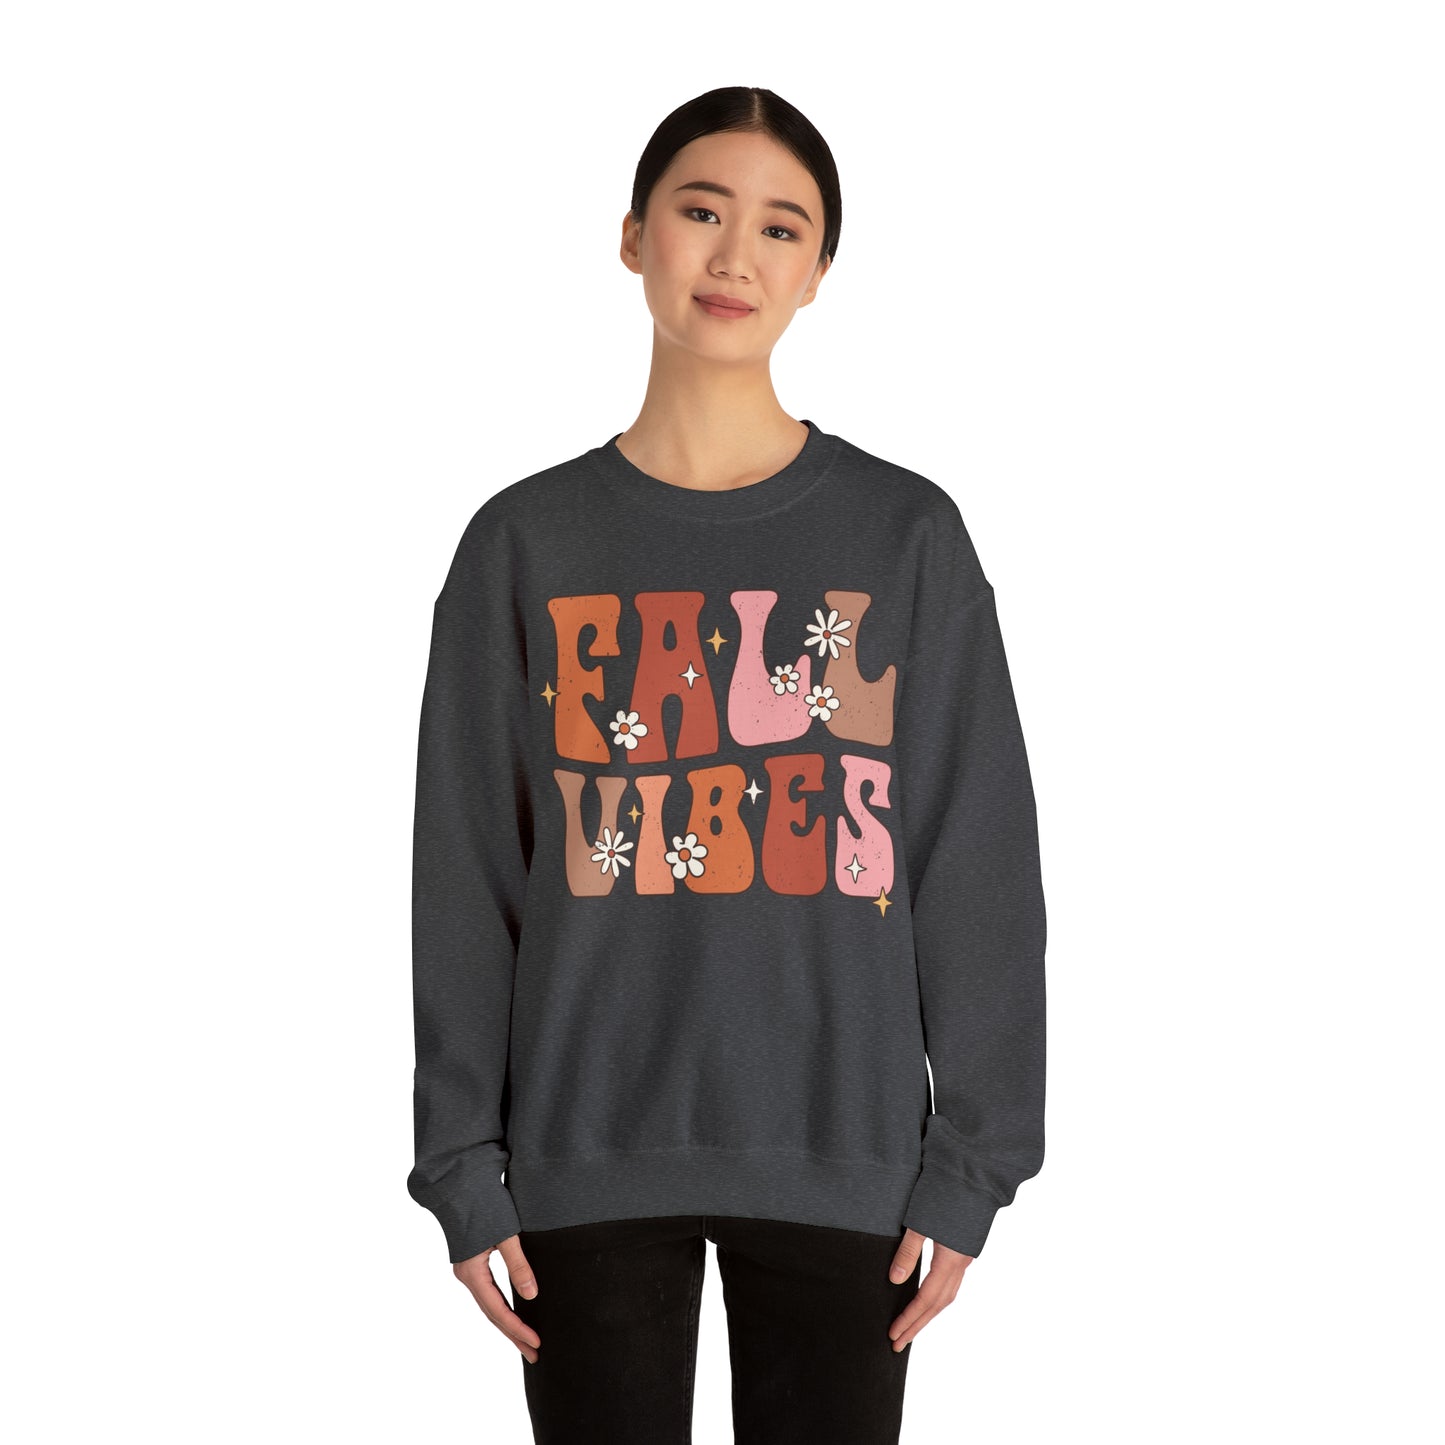 "Autumn Aura Extravaganza: 'Fall Vibes' Sweater for Cozy Seasonal Style"